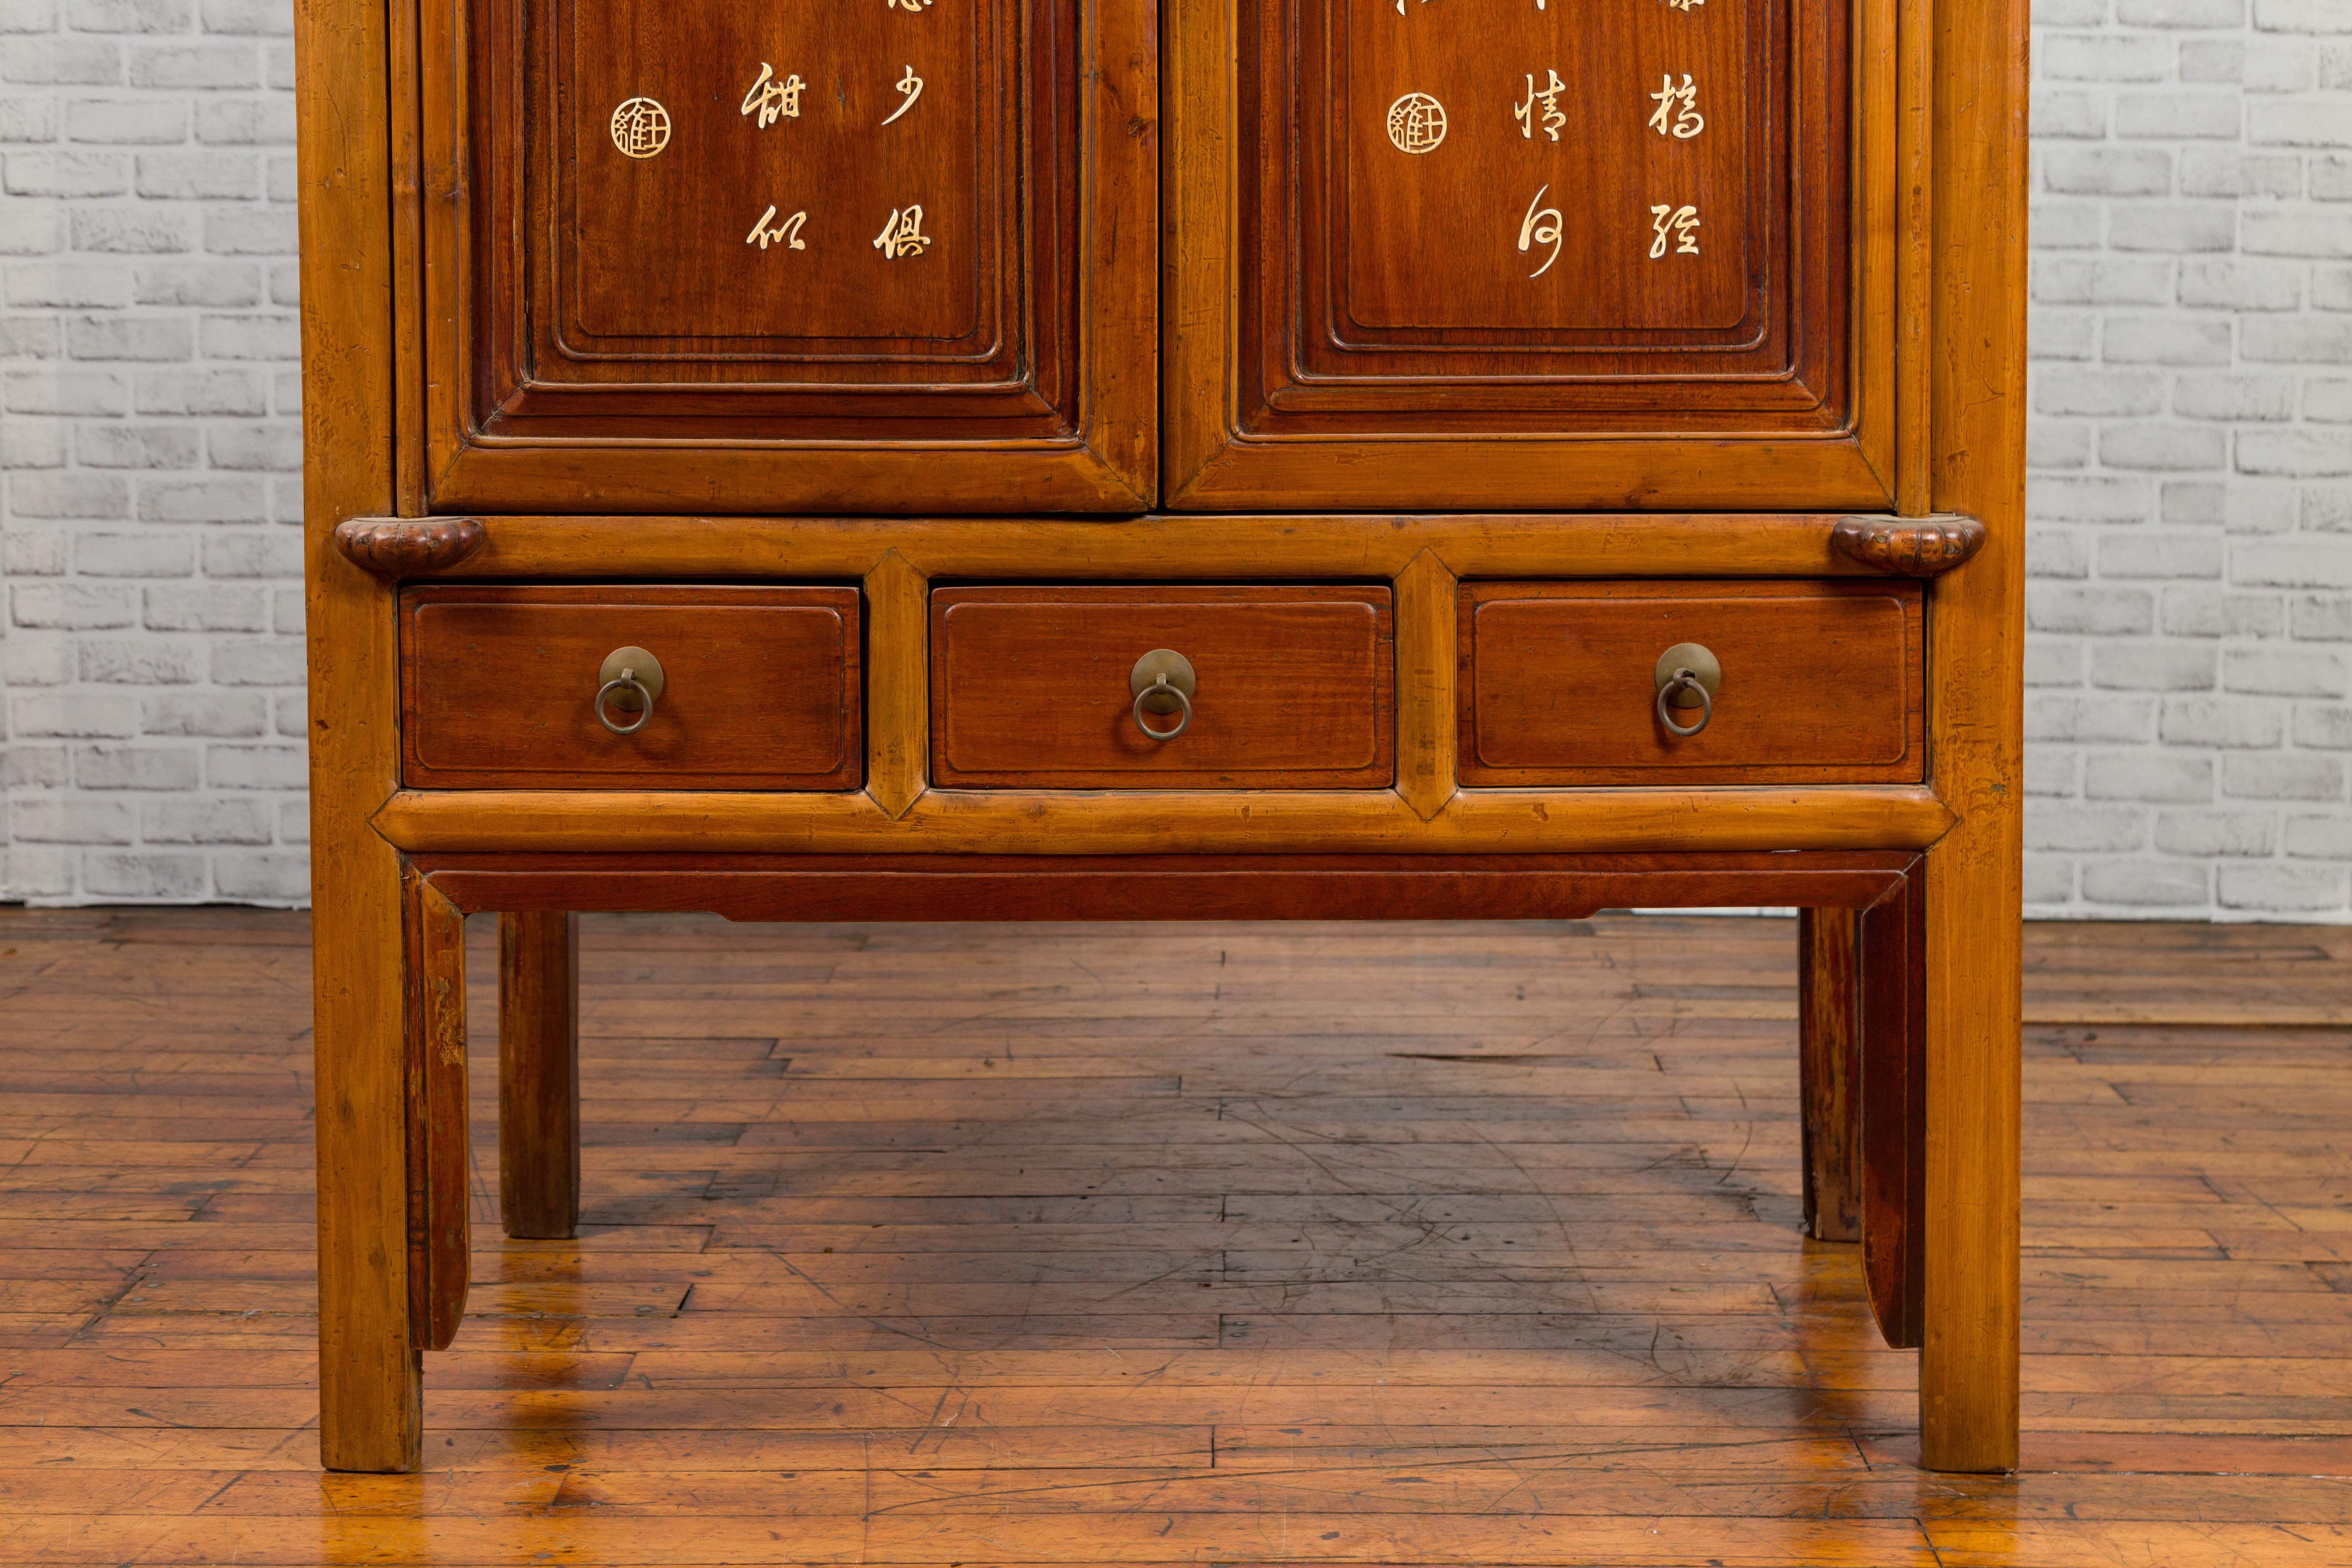 20th Century Chinese Antique Two-Toned Cabinet with Inlaid Calligraphy Motifs and Drawers For Sale